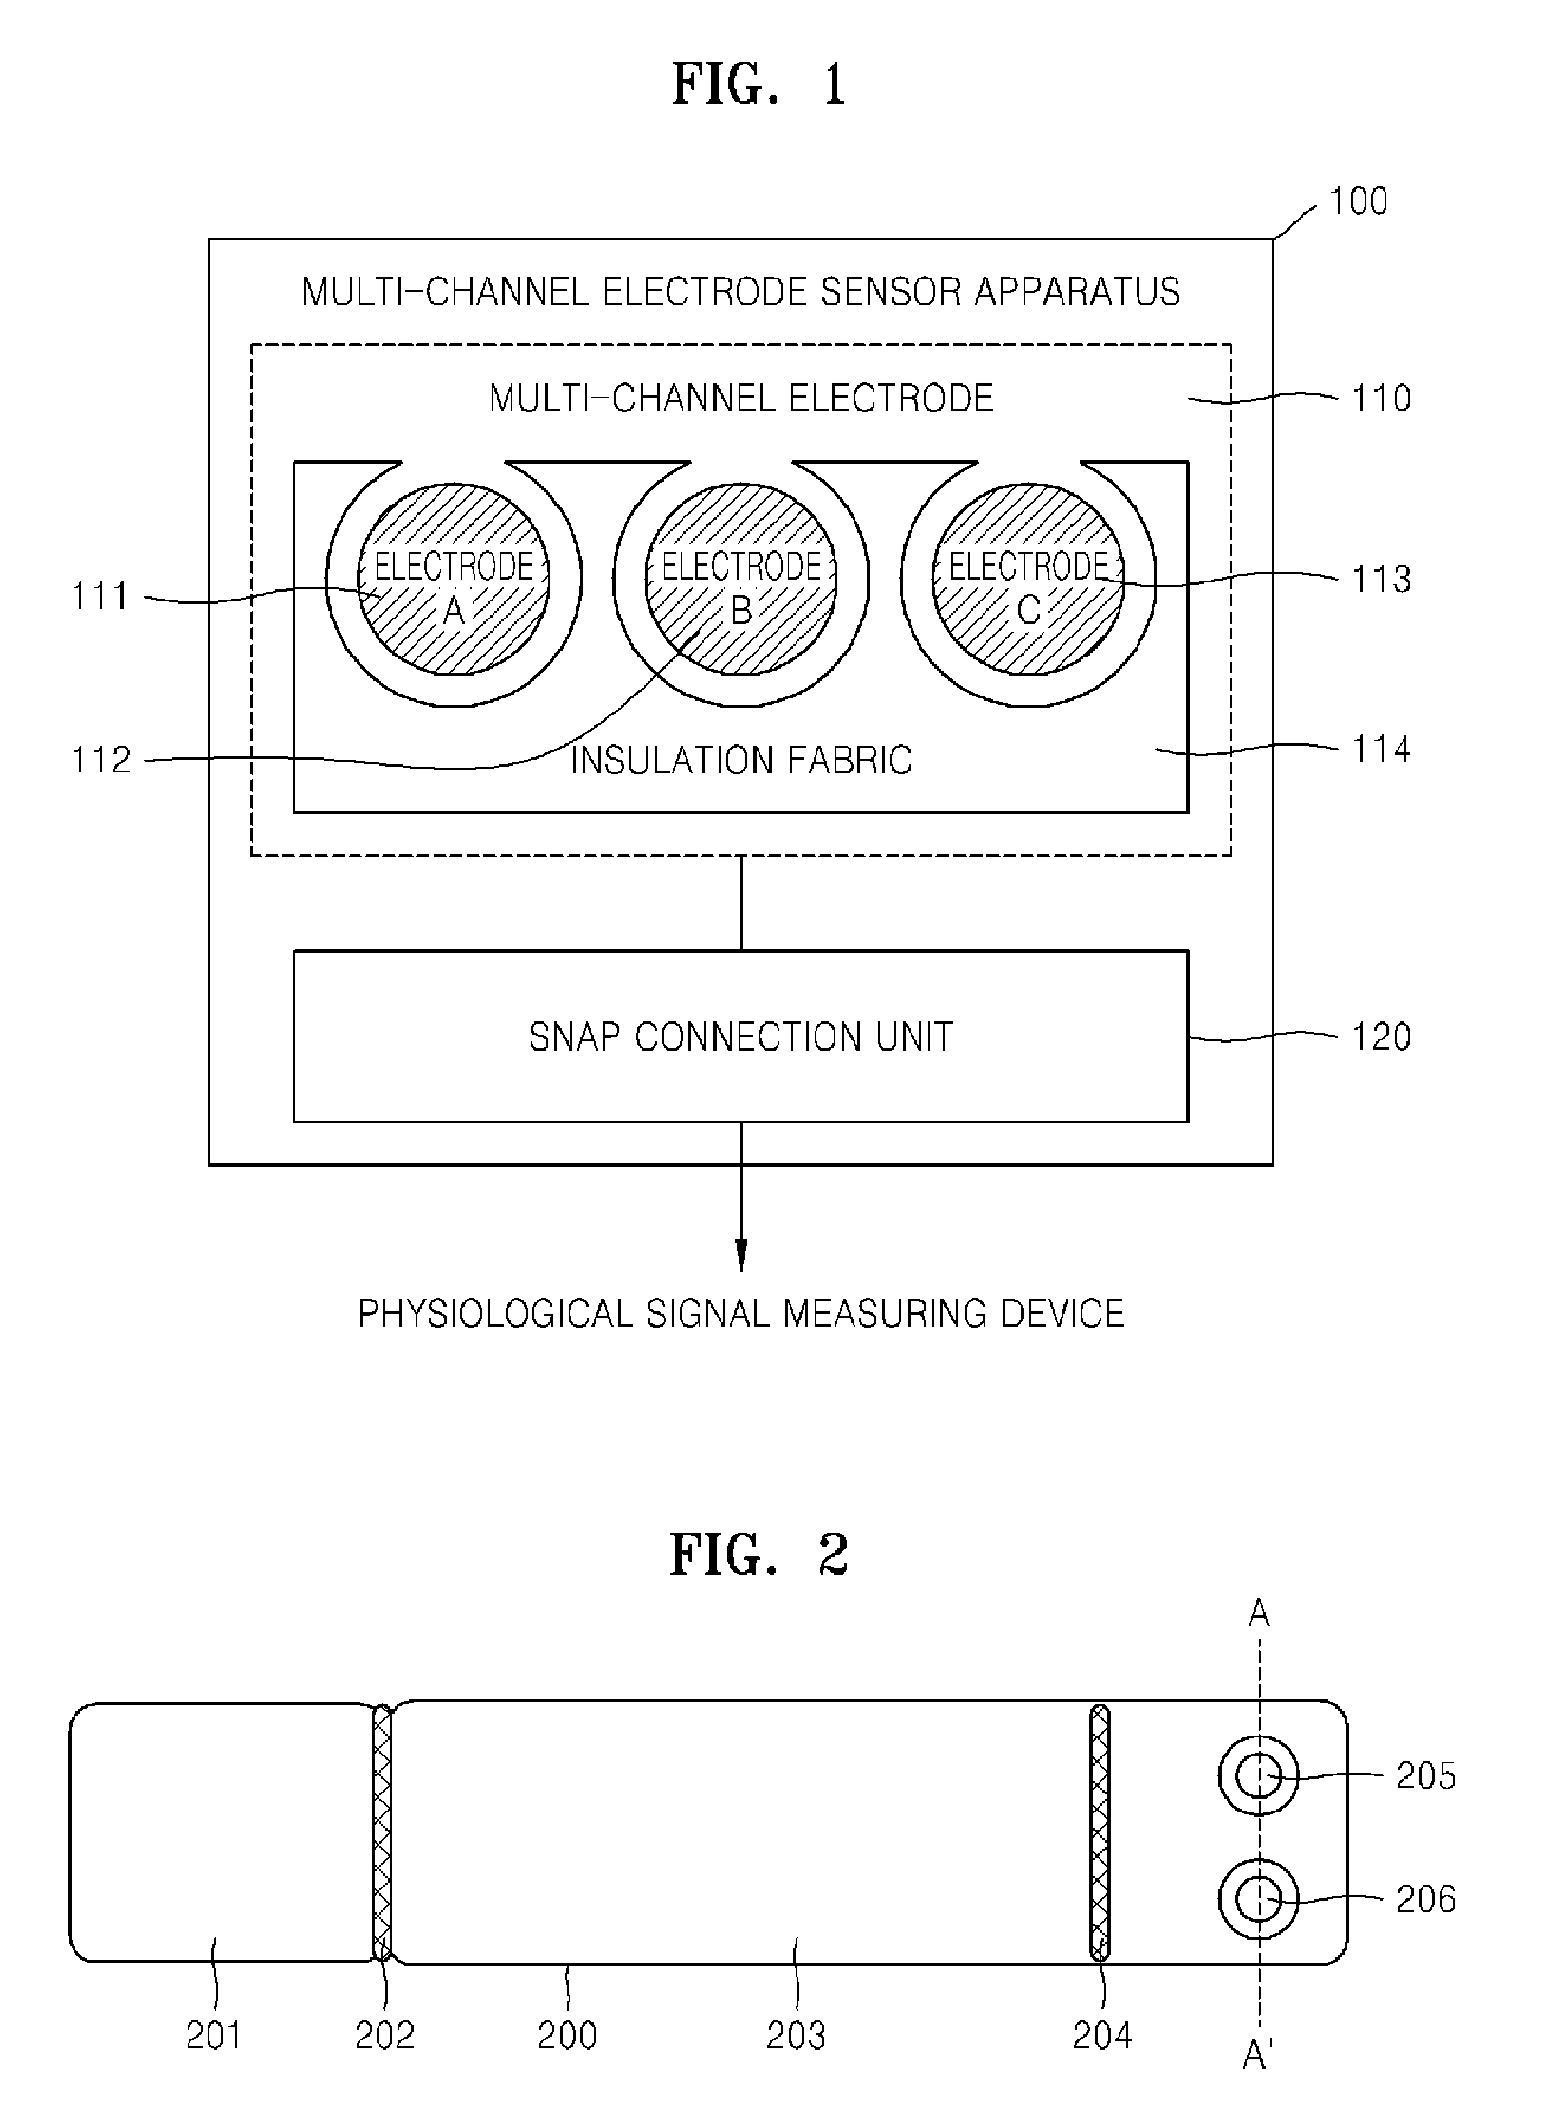 Multi-channel electrode sensor apparatus for simultaneously measuring a plurality of physiological signals